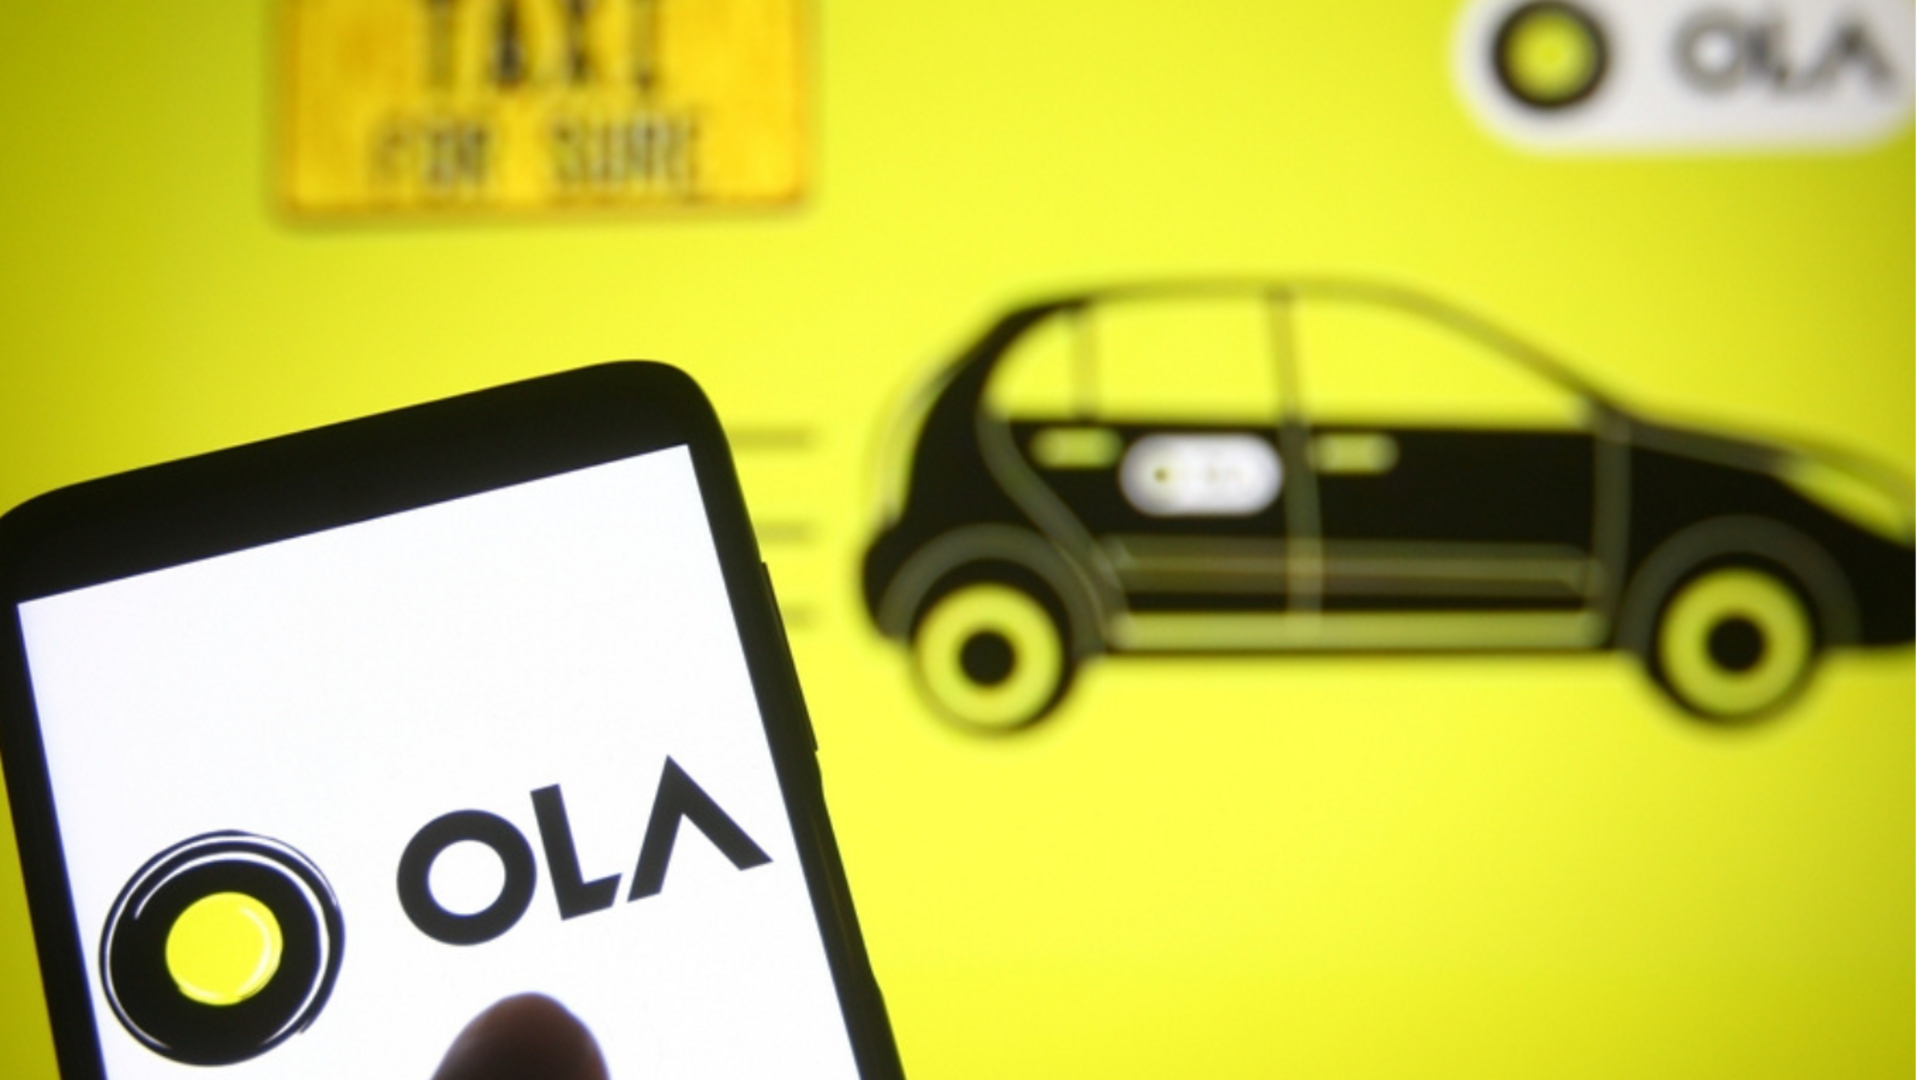 Ola's valuation plunges 74% to $1.9 billion